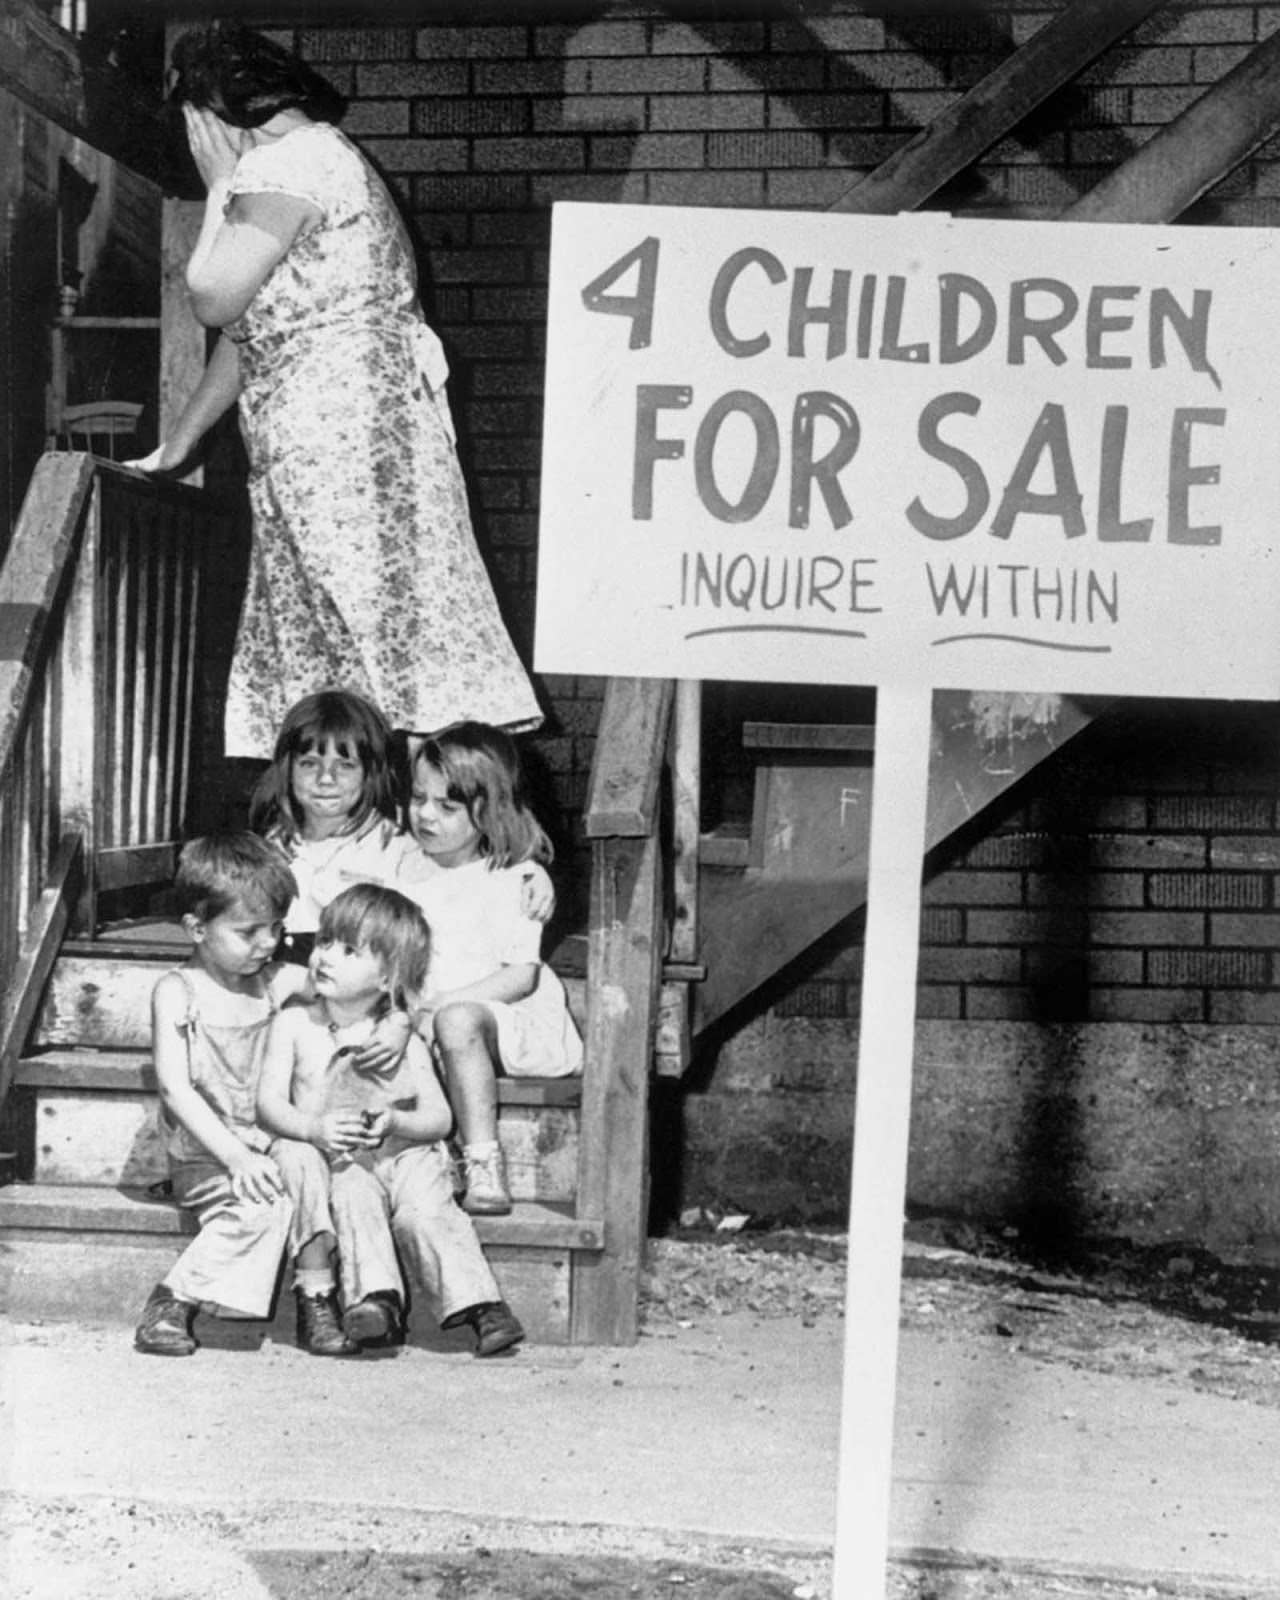 The Chalifoux Family: The Tragic Story Behind the Iconic 'Children for Sale' Image